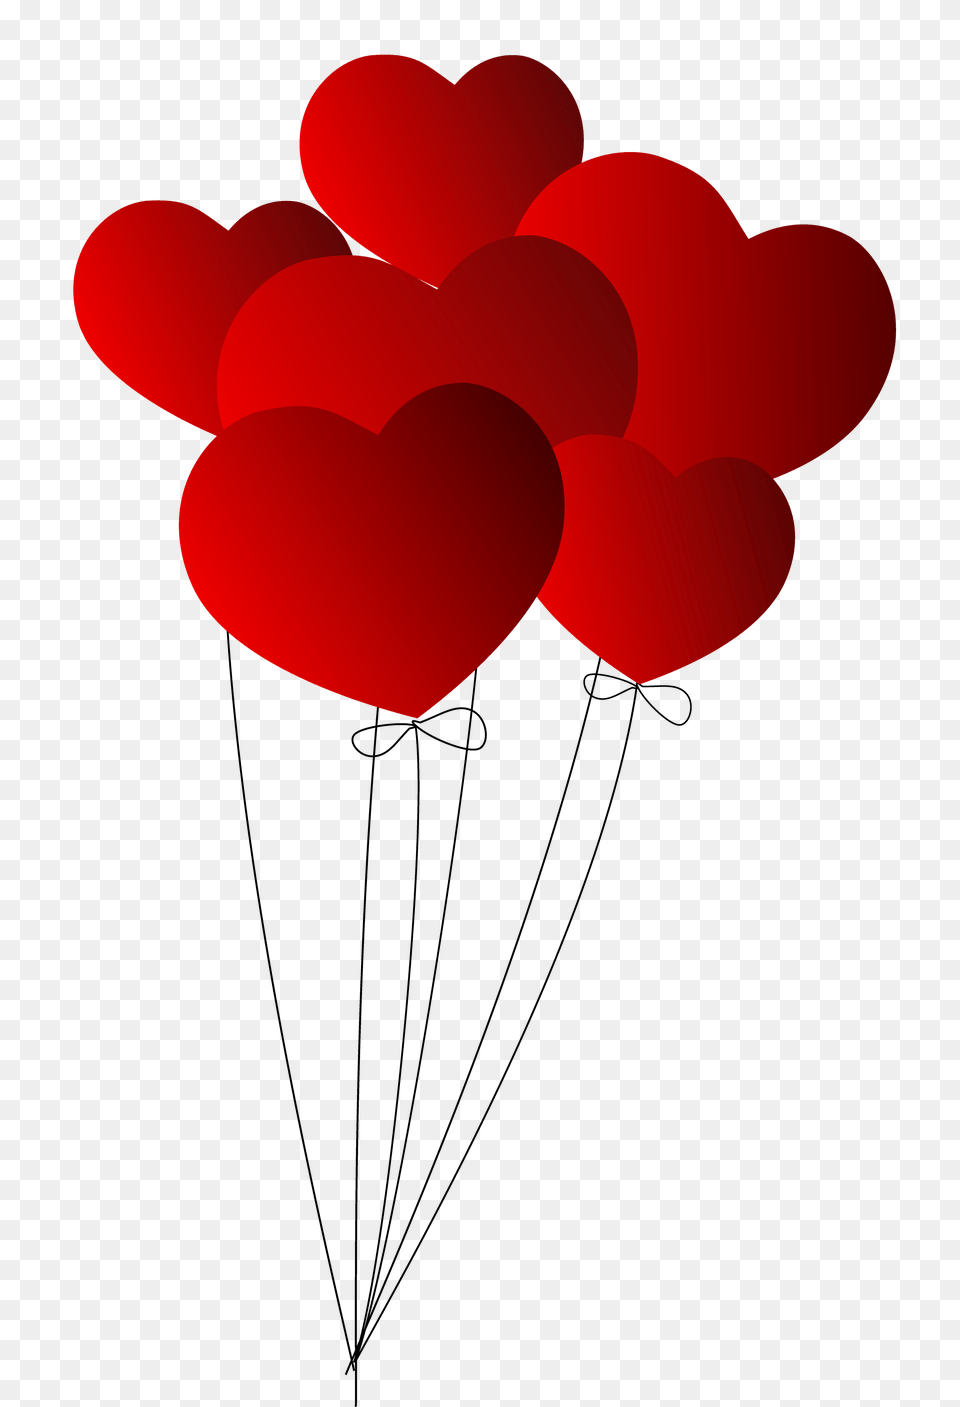 Download Hd Heart Balloon Image Love Heart Balloons, Carnation, Flower, Petal, Plant Free Png